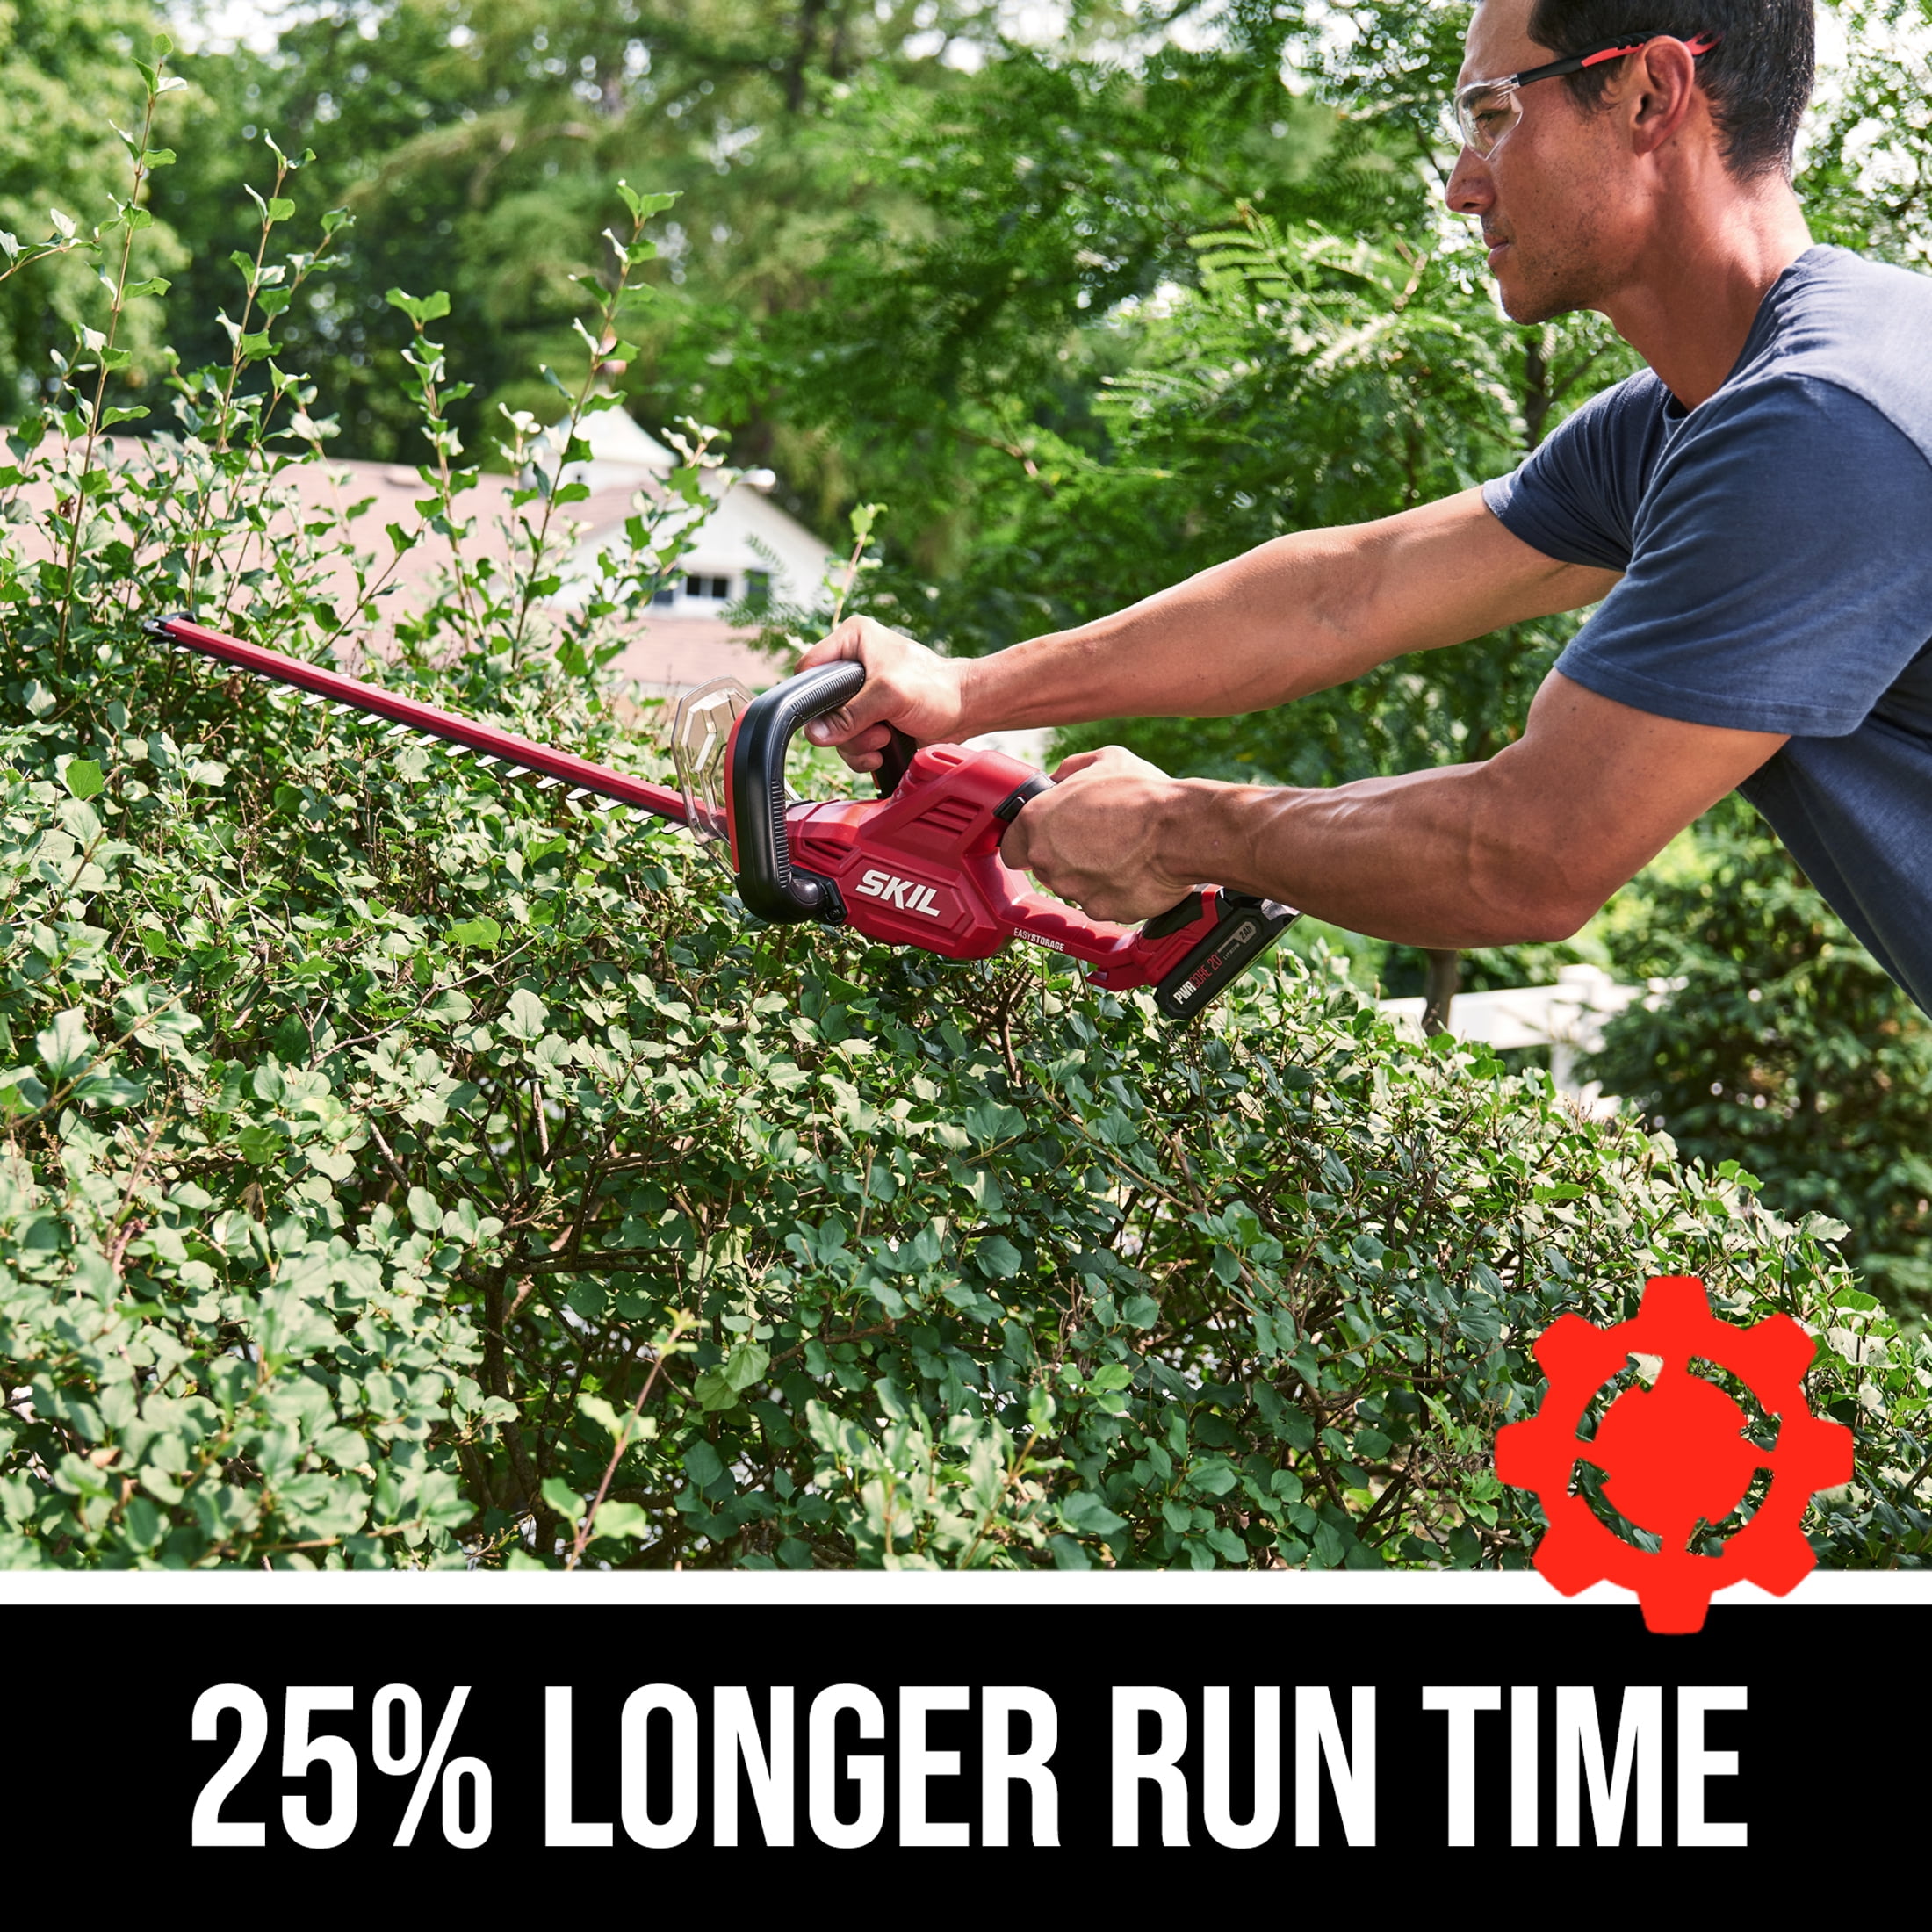 Red SKIL HT4222B-10 PWR CORE 20 22 Hedge Trimmer Kit Includes 2.0Ah Battery and Charger